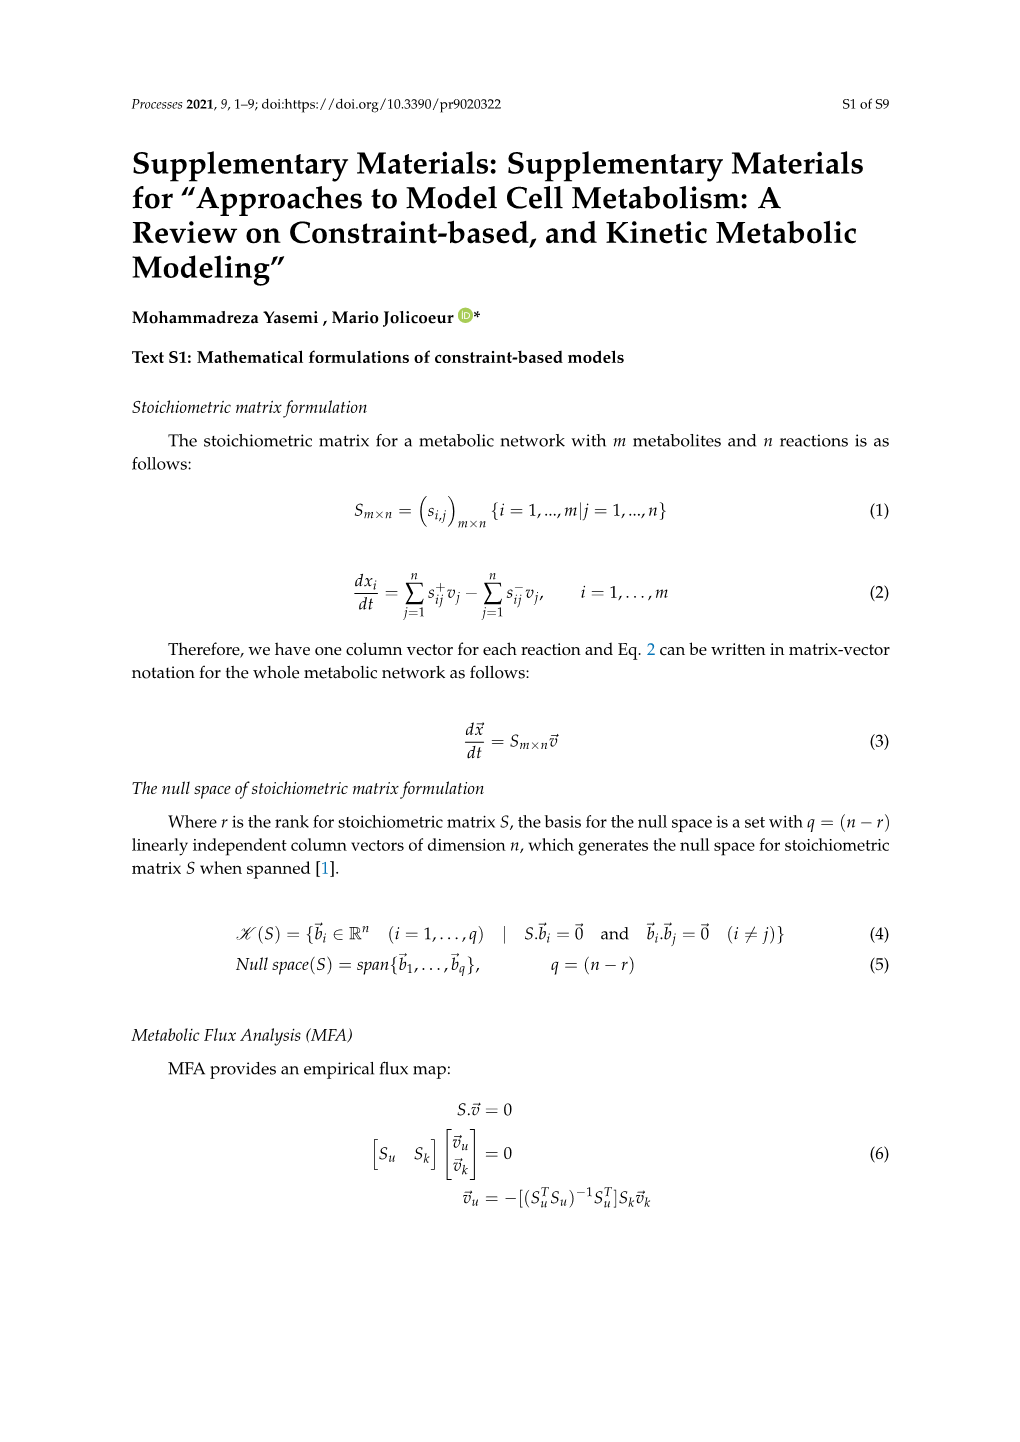 A Review on Constraint-Based, and Kinetic Metabolic Modeling”